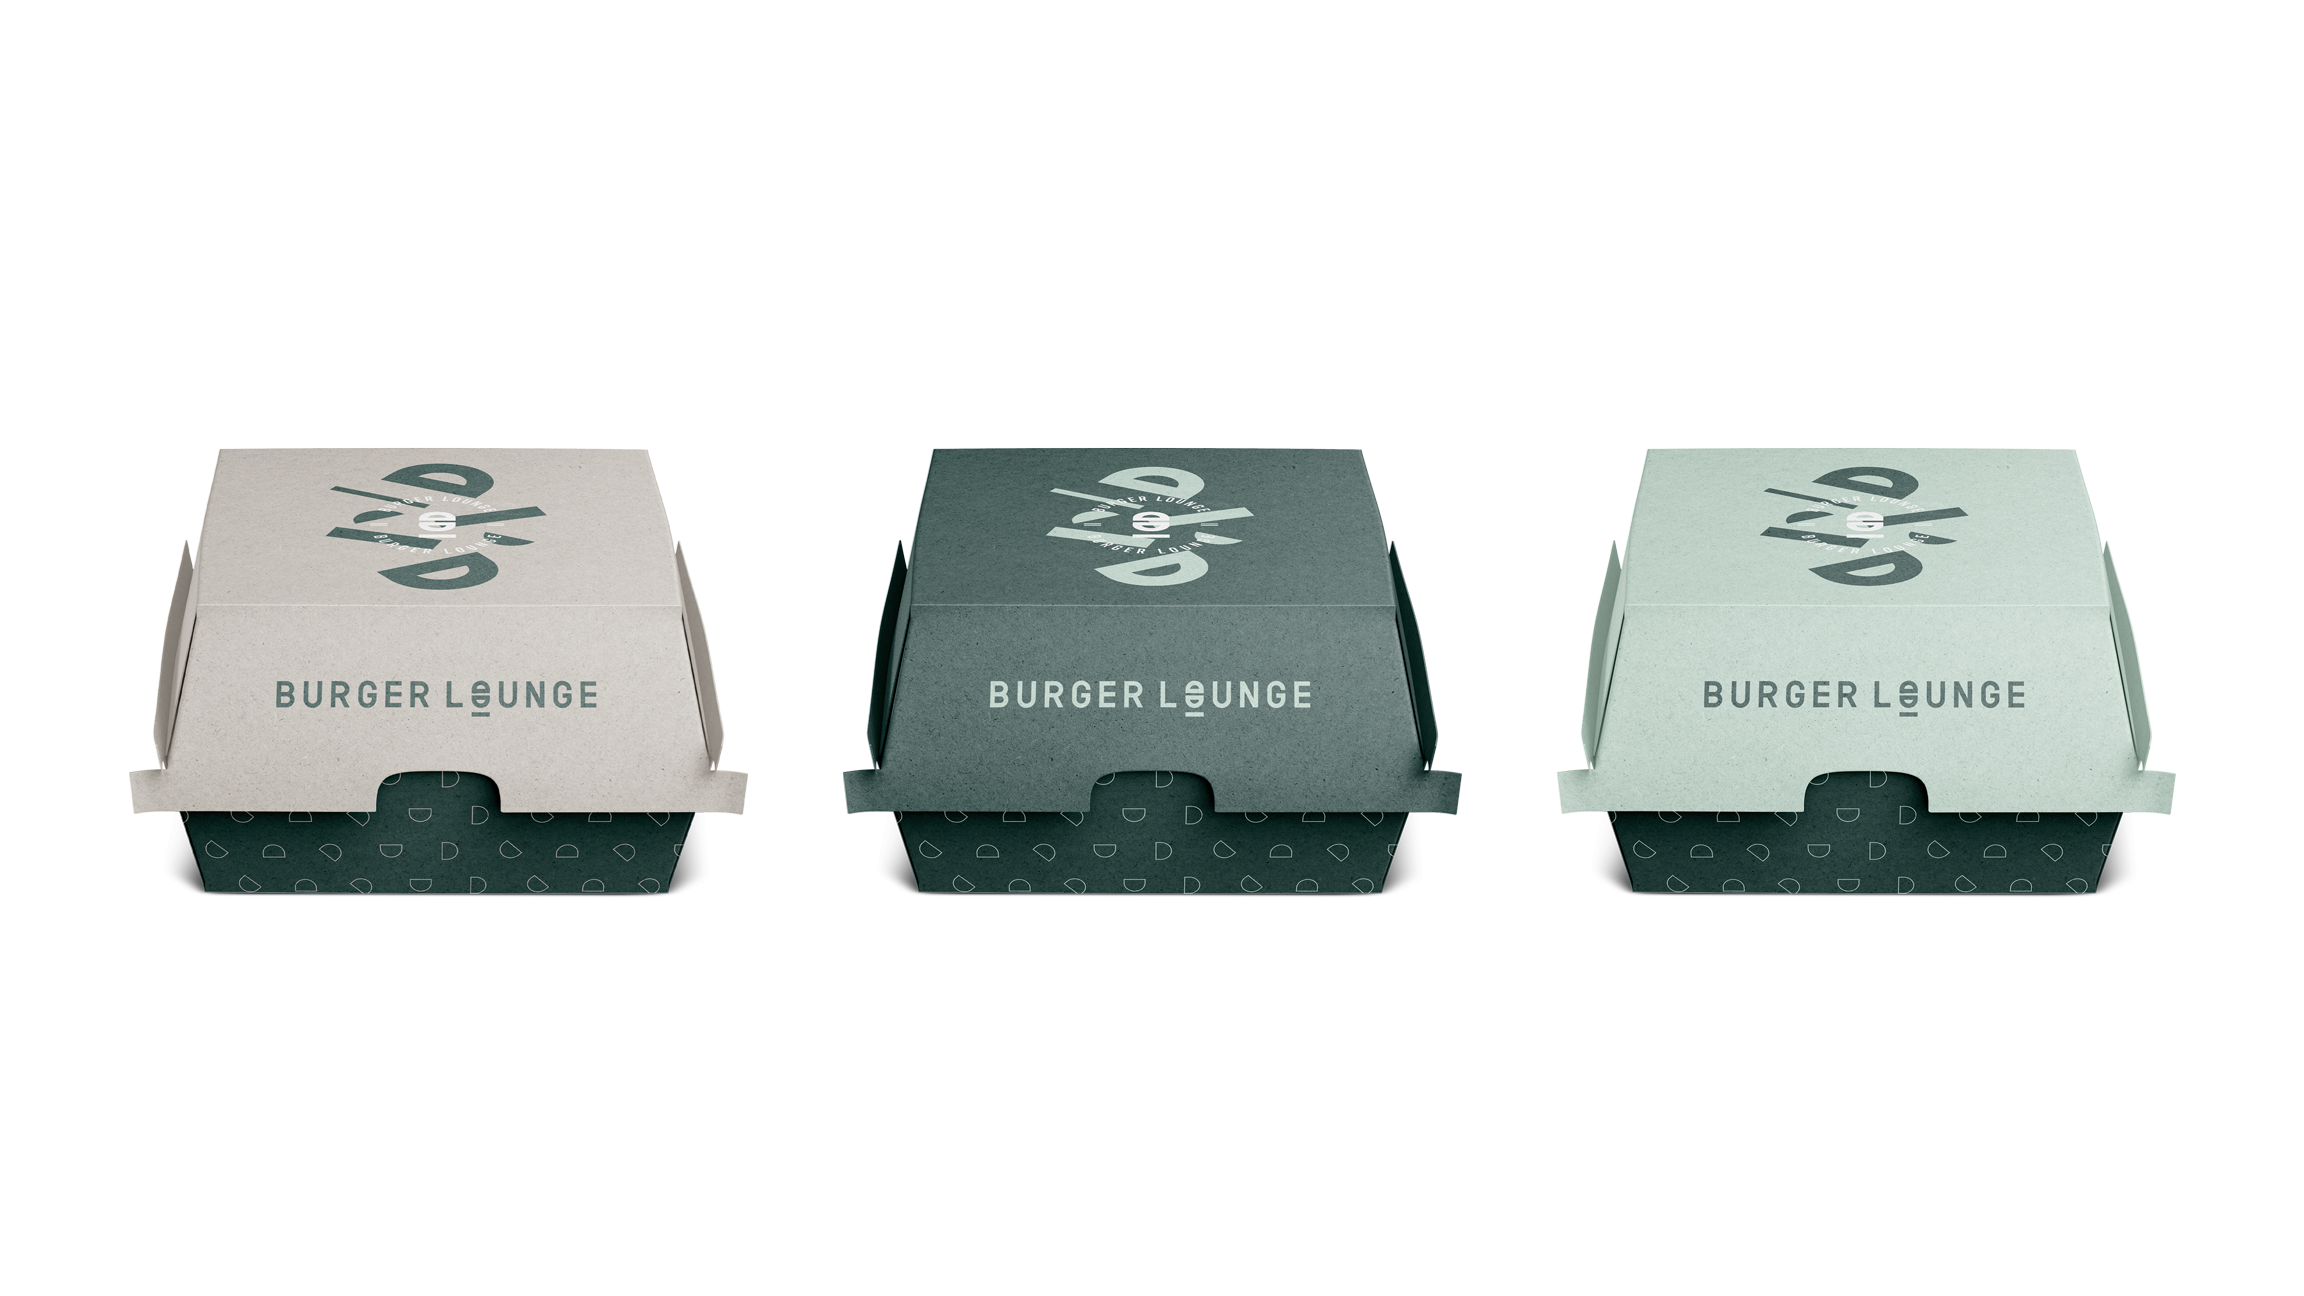 Burger-Lounge-Brand-Facelift-By-Millimeter-Creative-Agency-M04